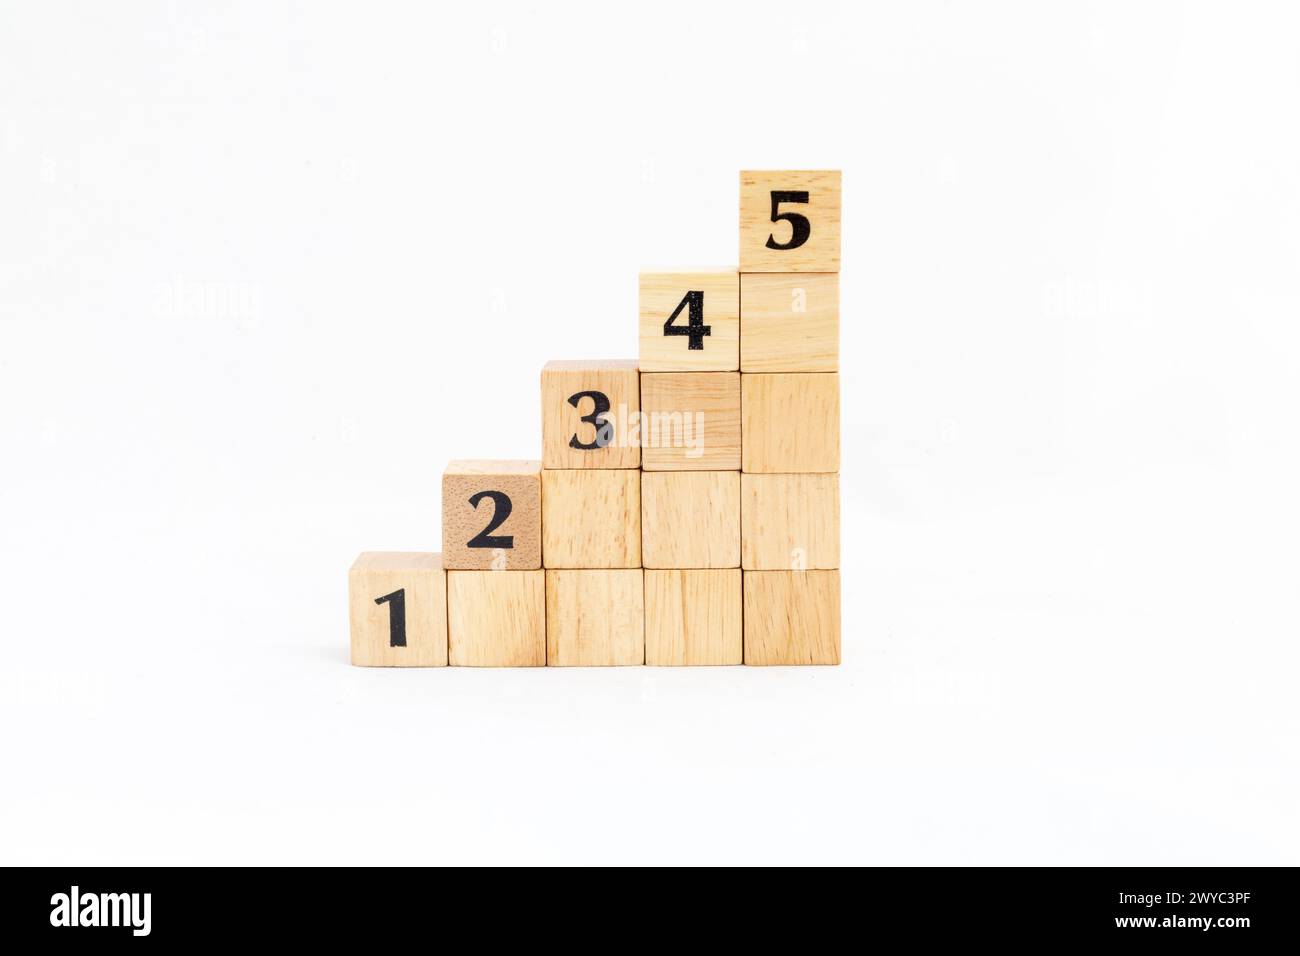 Wooden blocks stacking as step up stair with number 1, 2, 3, 4 and 5 . Business concept for growth and success process. Stock Photo